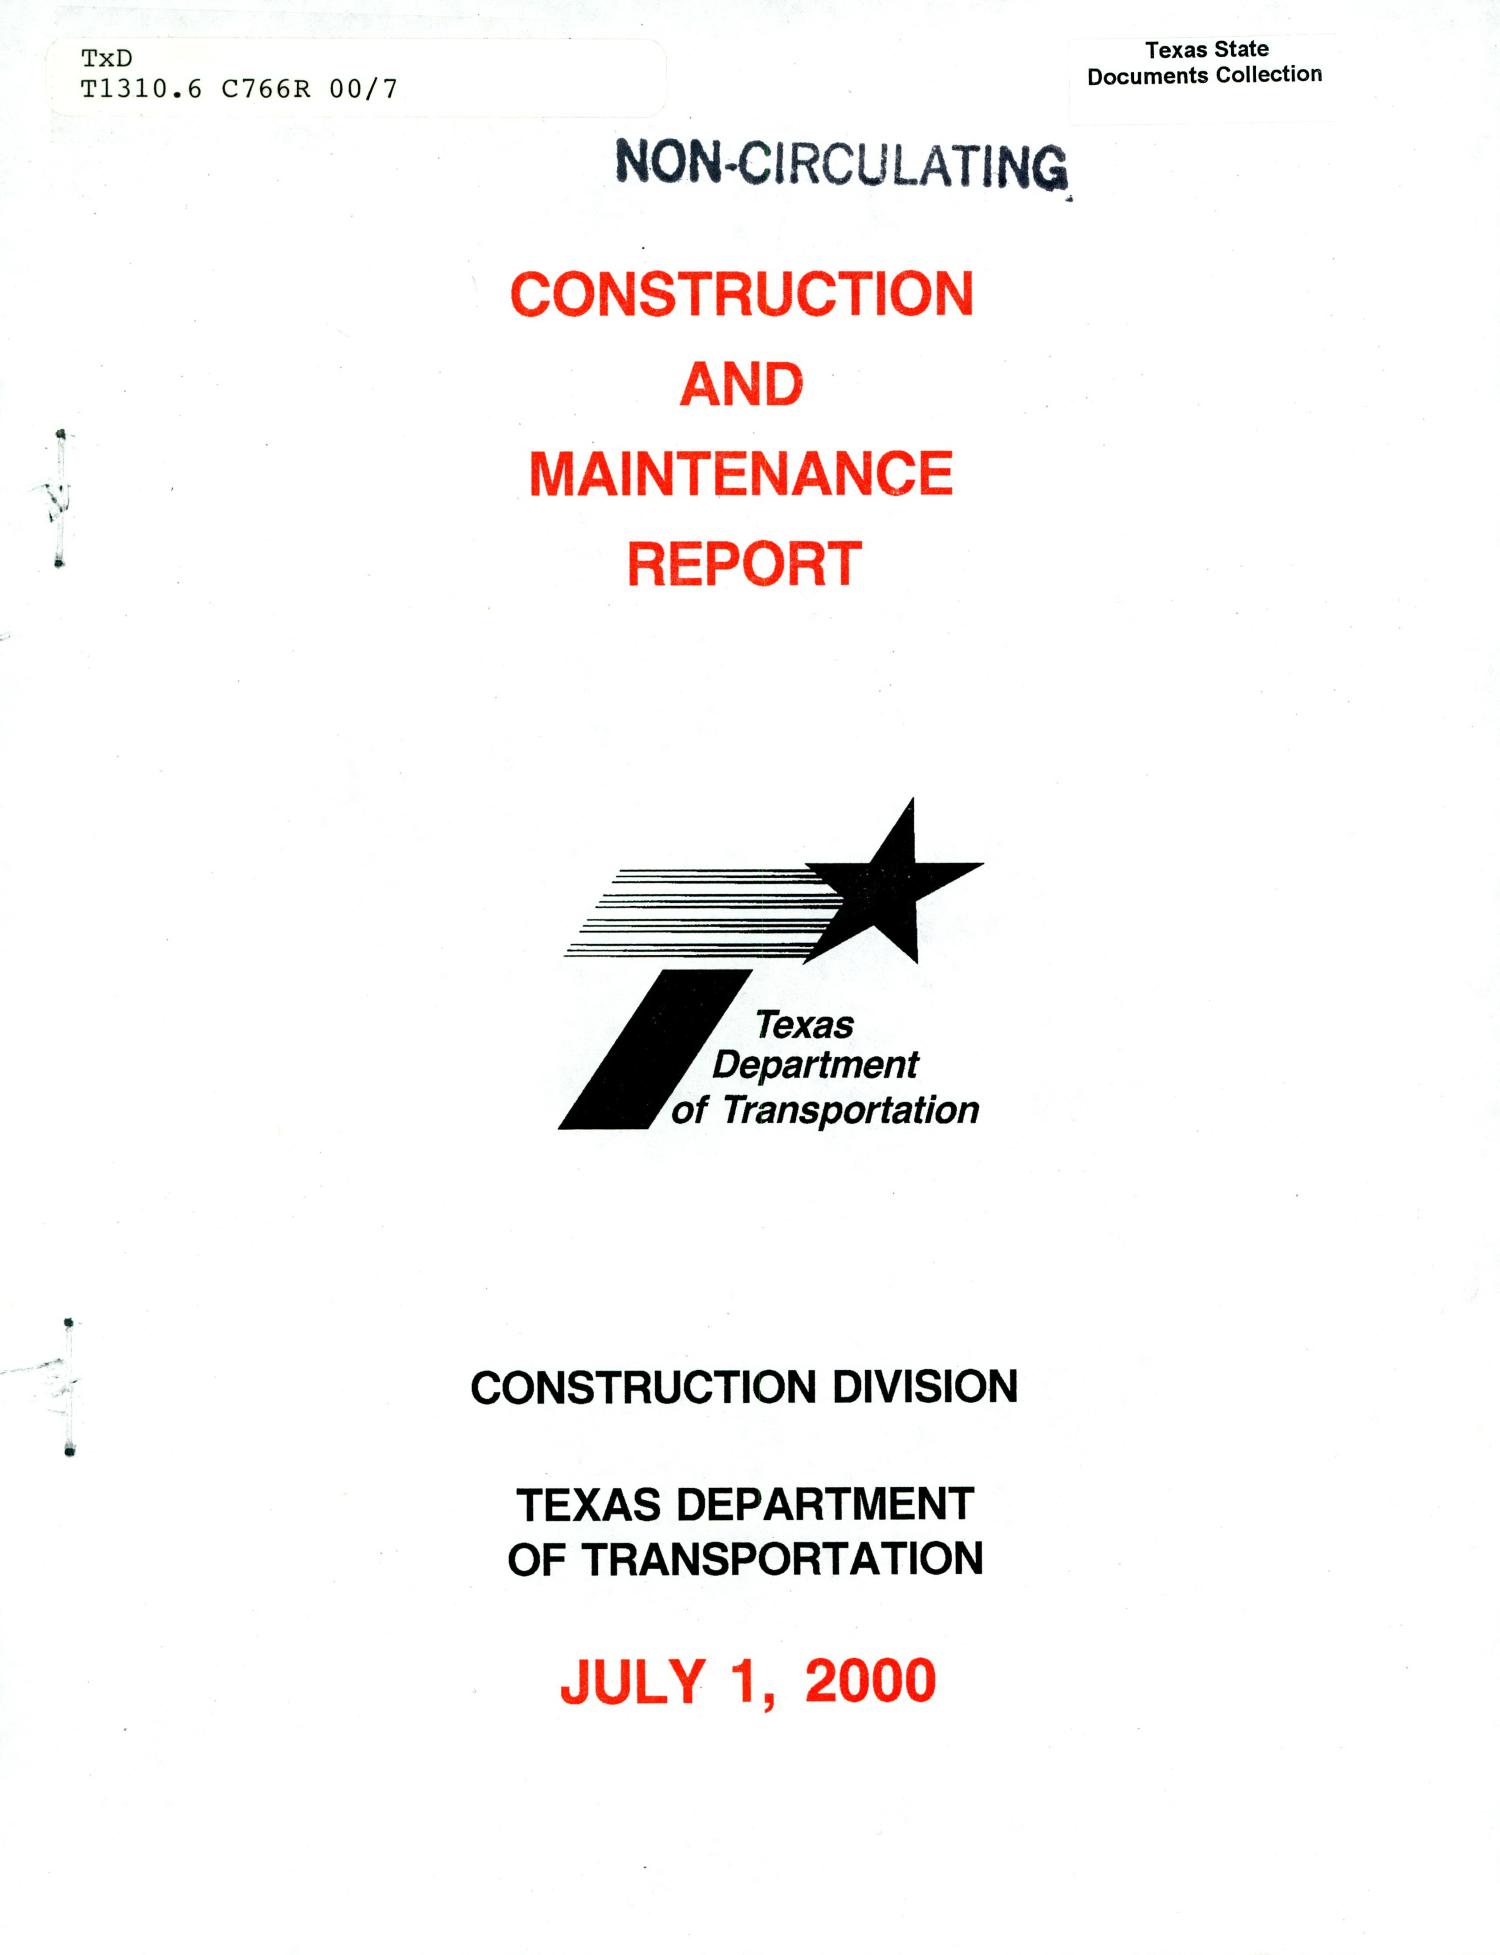 Texas Construction and Maintenance Report: July 2000
                                                
                                                    FRONT COVER
                                                